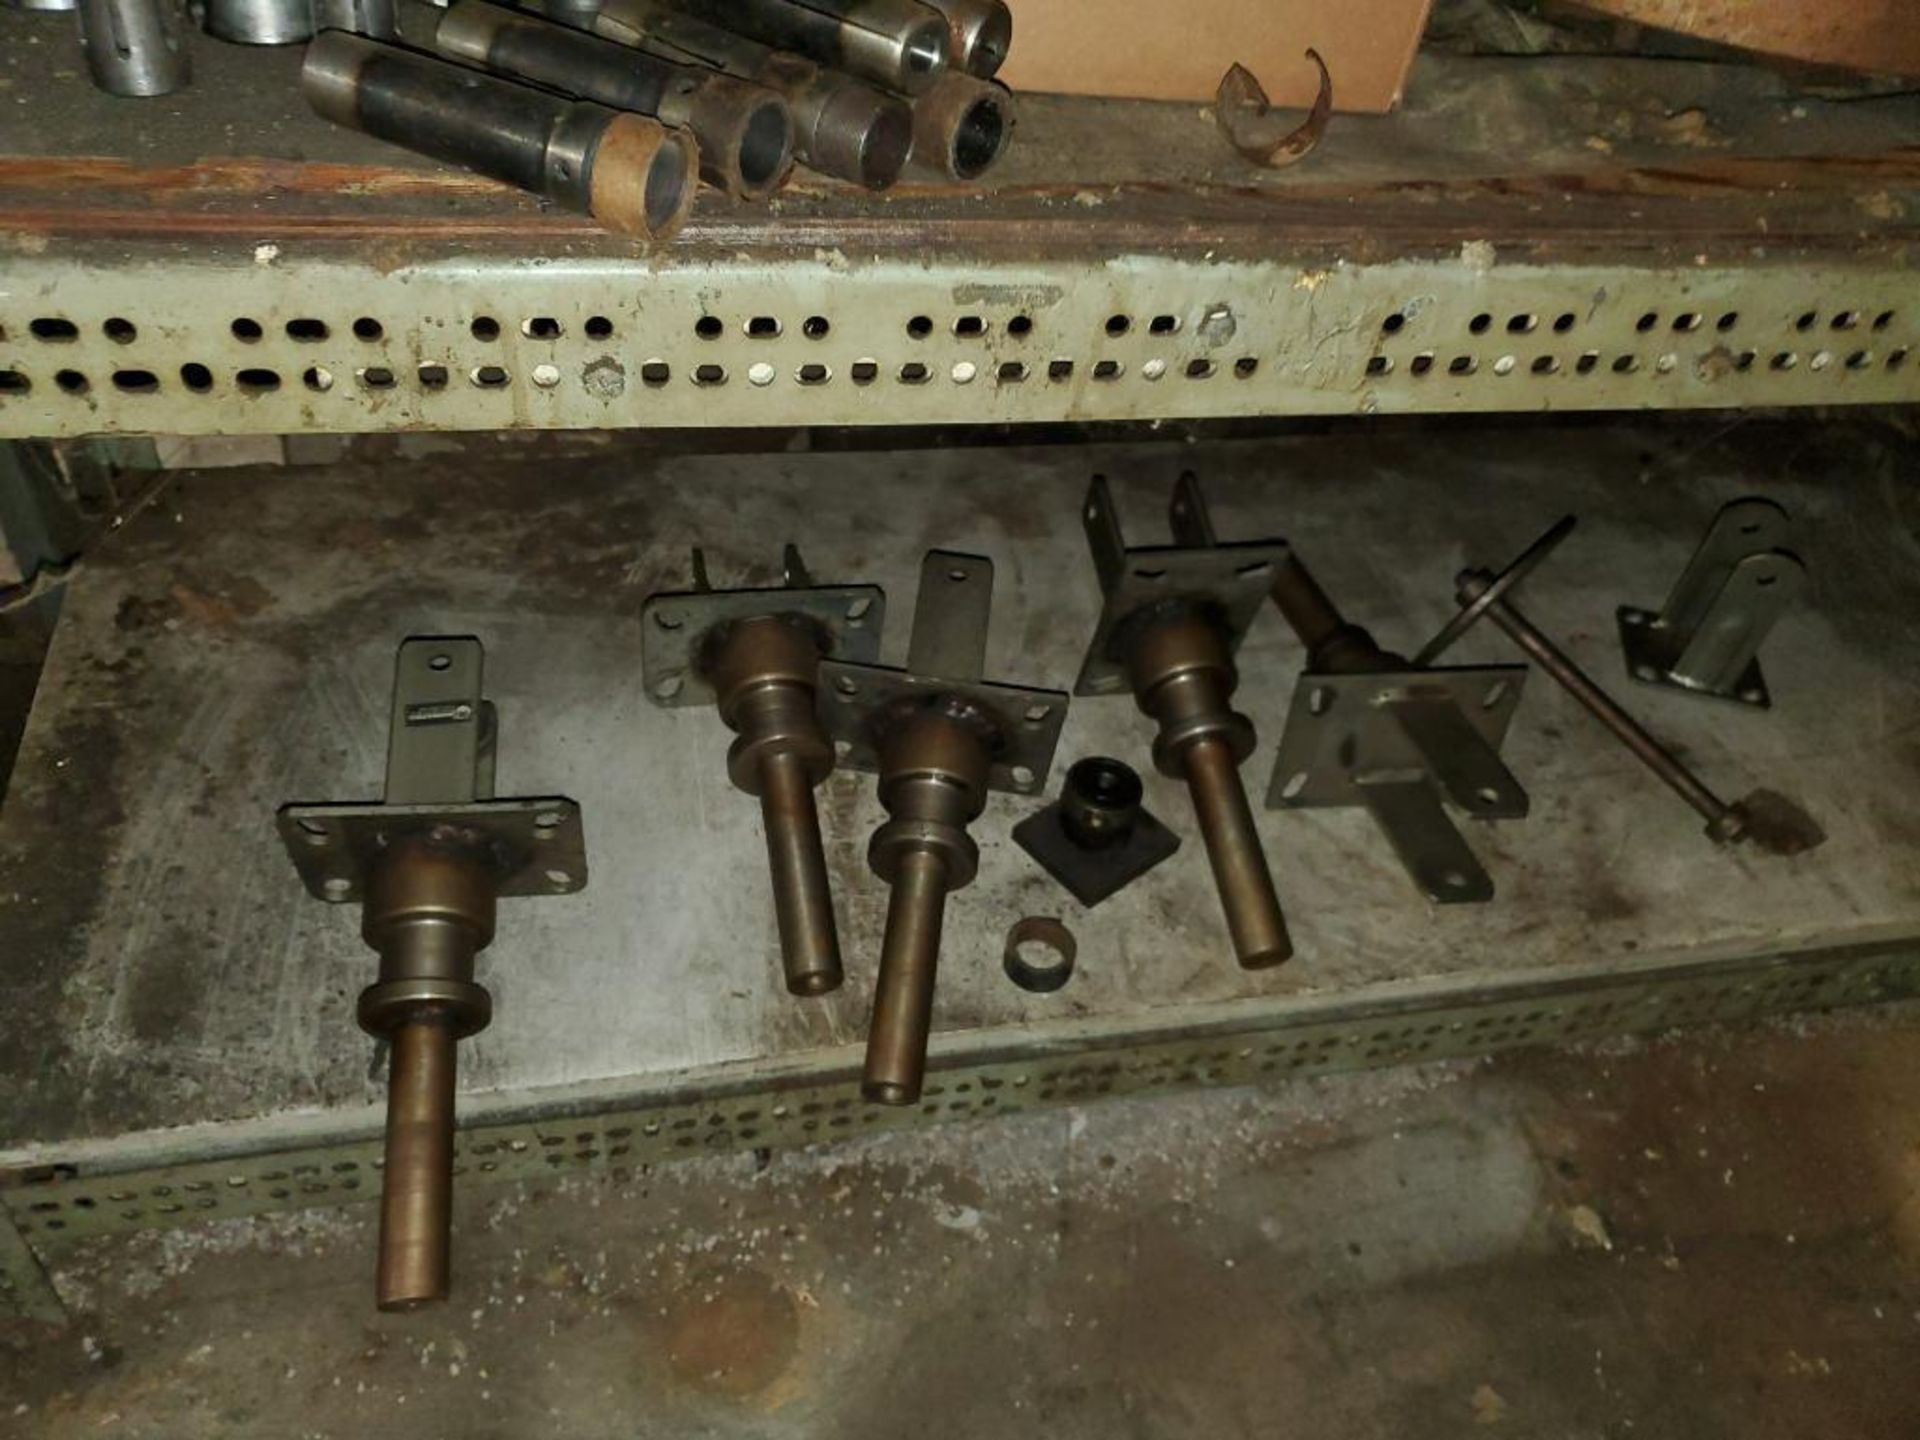 Large qty of Acme Gridley screw machine tooling for 1" machine. - Image 13 of 30